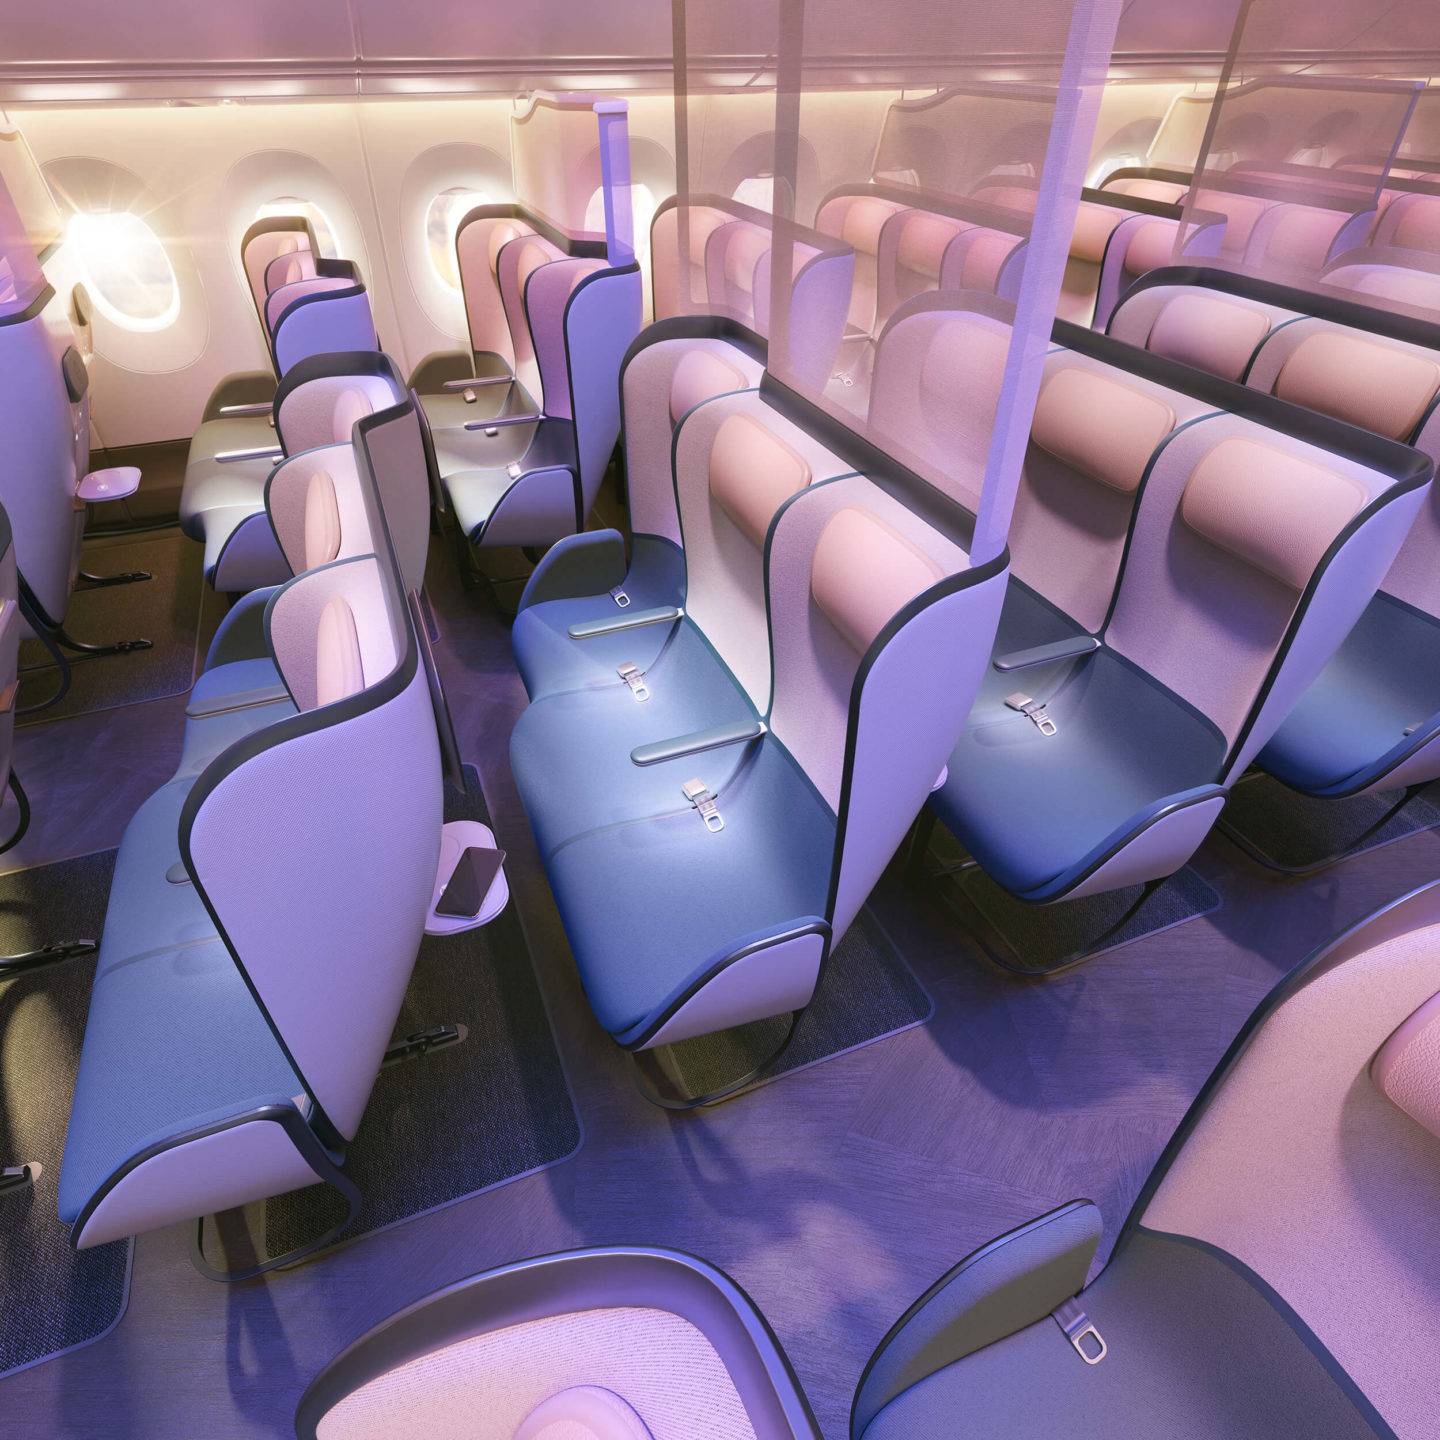 Section of an economy class cabin, featuring light coloured dividing screens above seats every two rows, as well as staggered seating